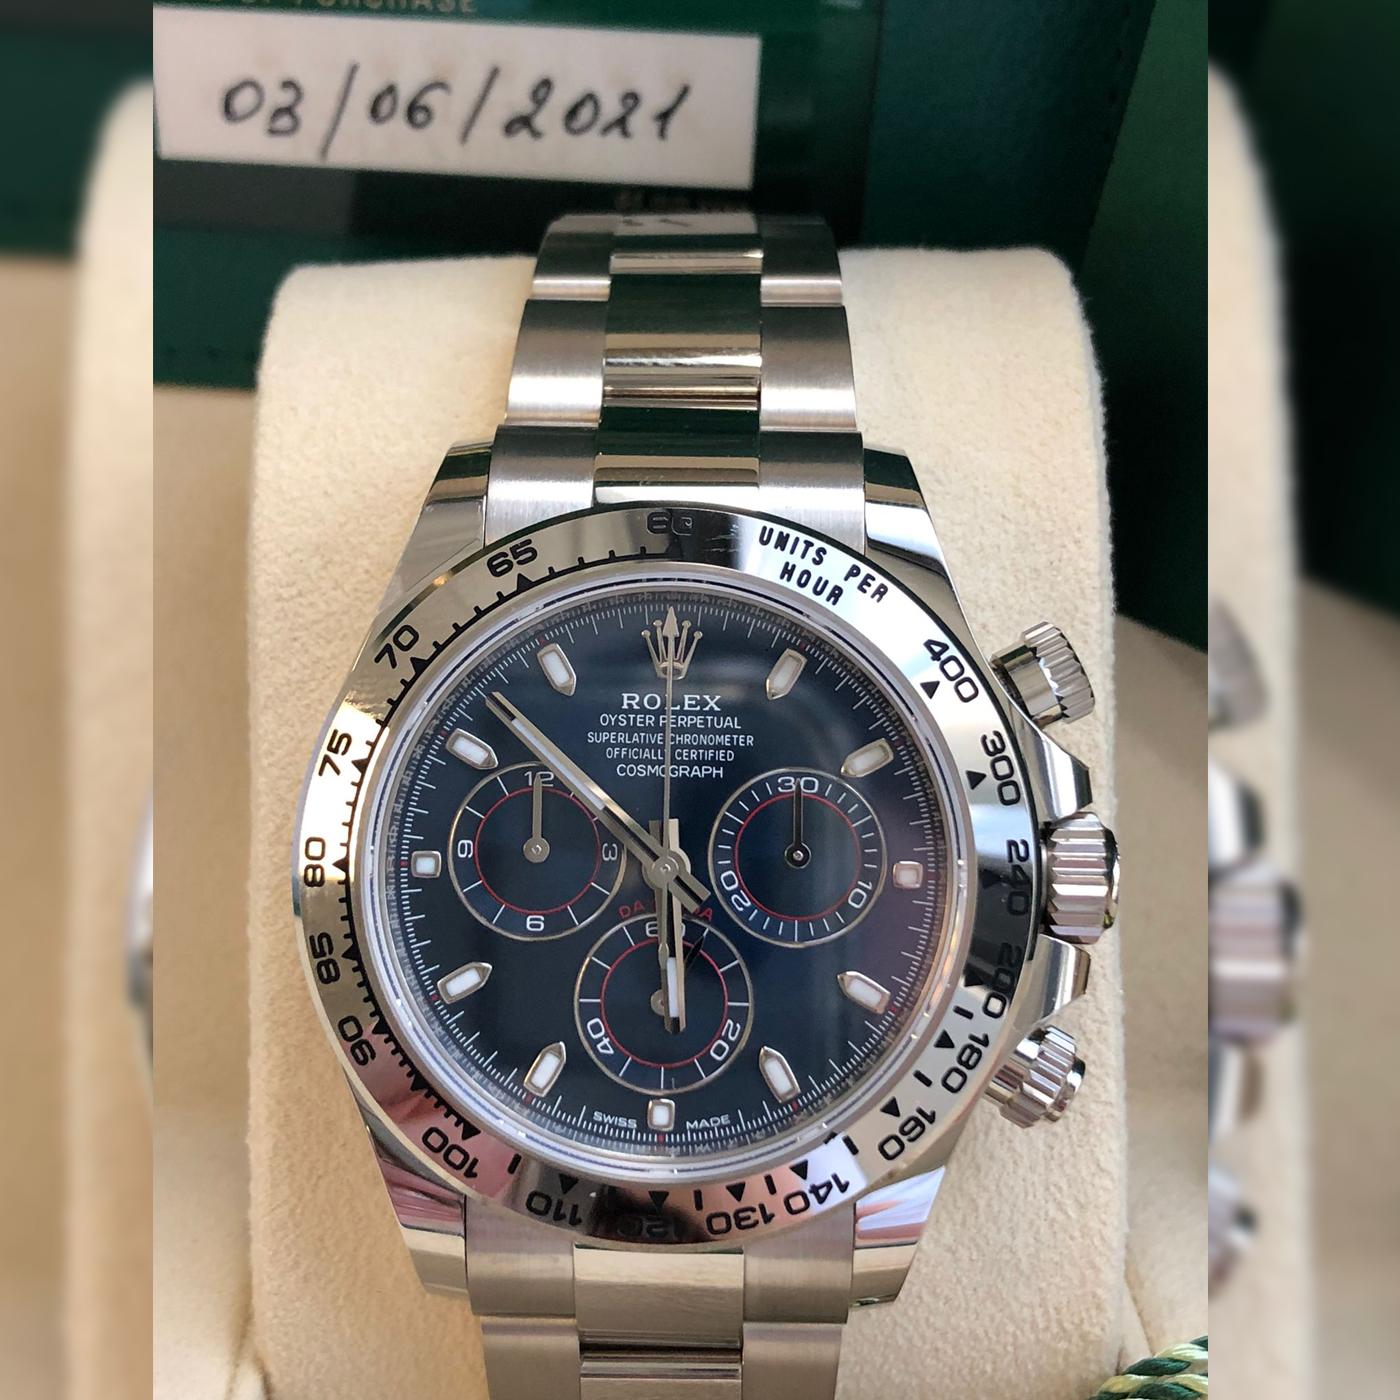 Women's or Men's Rolex Daytona Oyster Perpetual Cosmograph 18k White Gold Blue Dial 116509